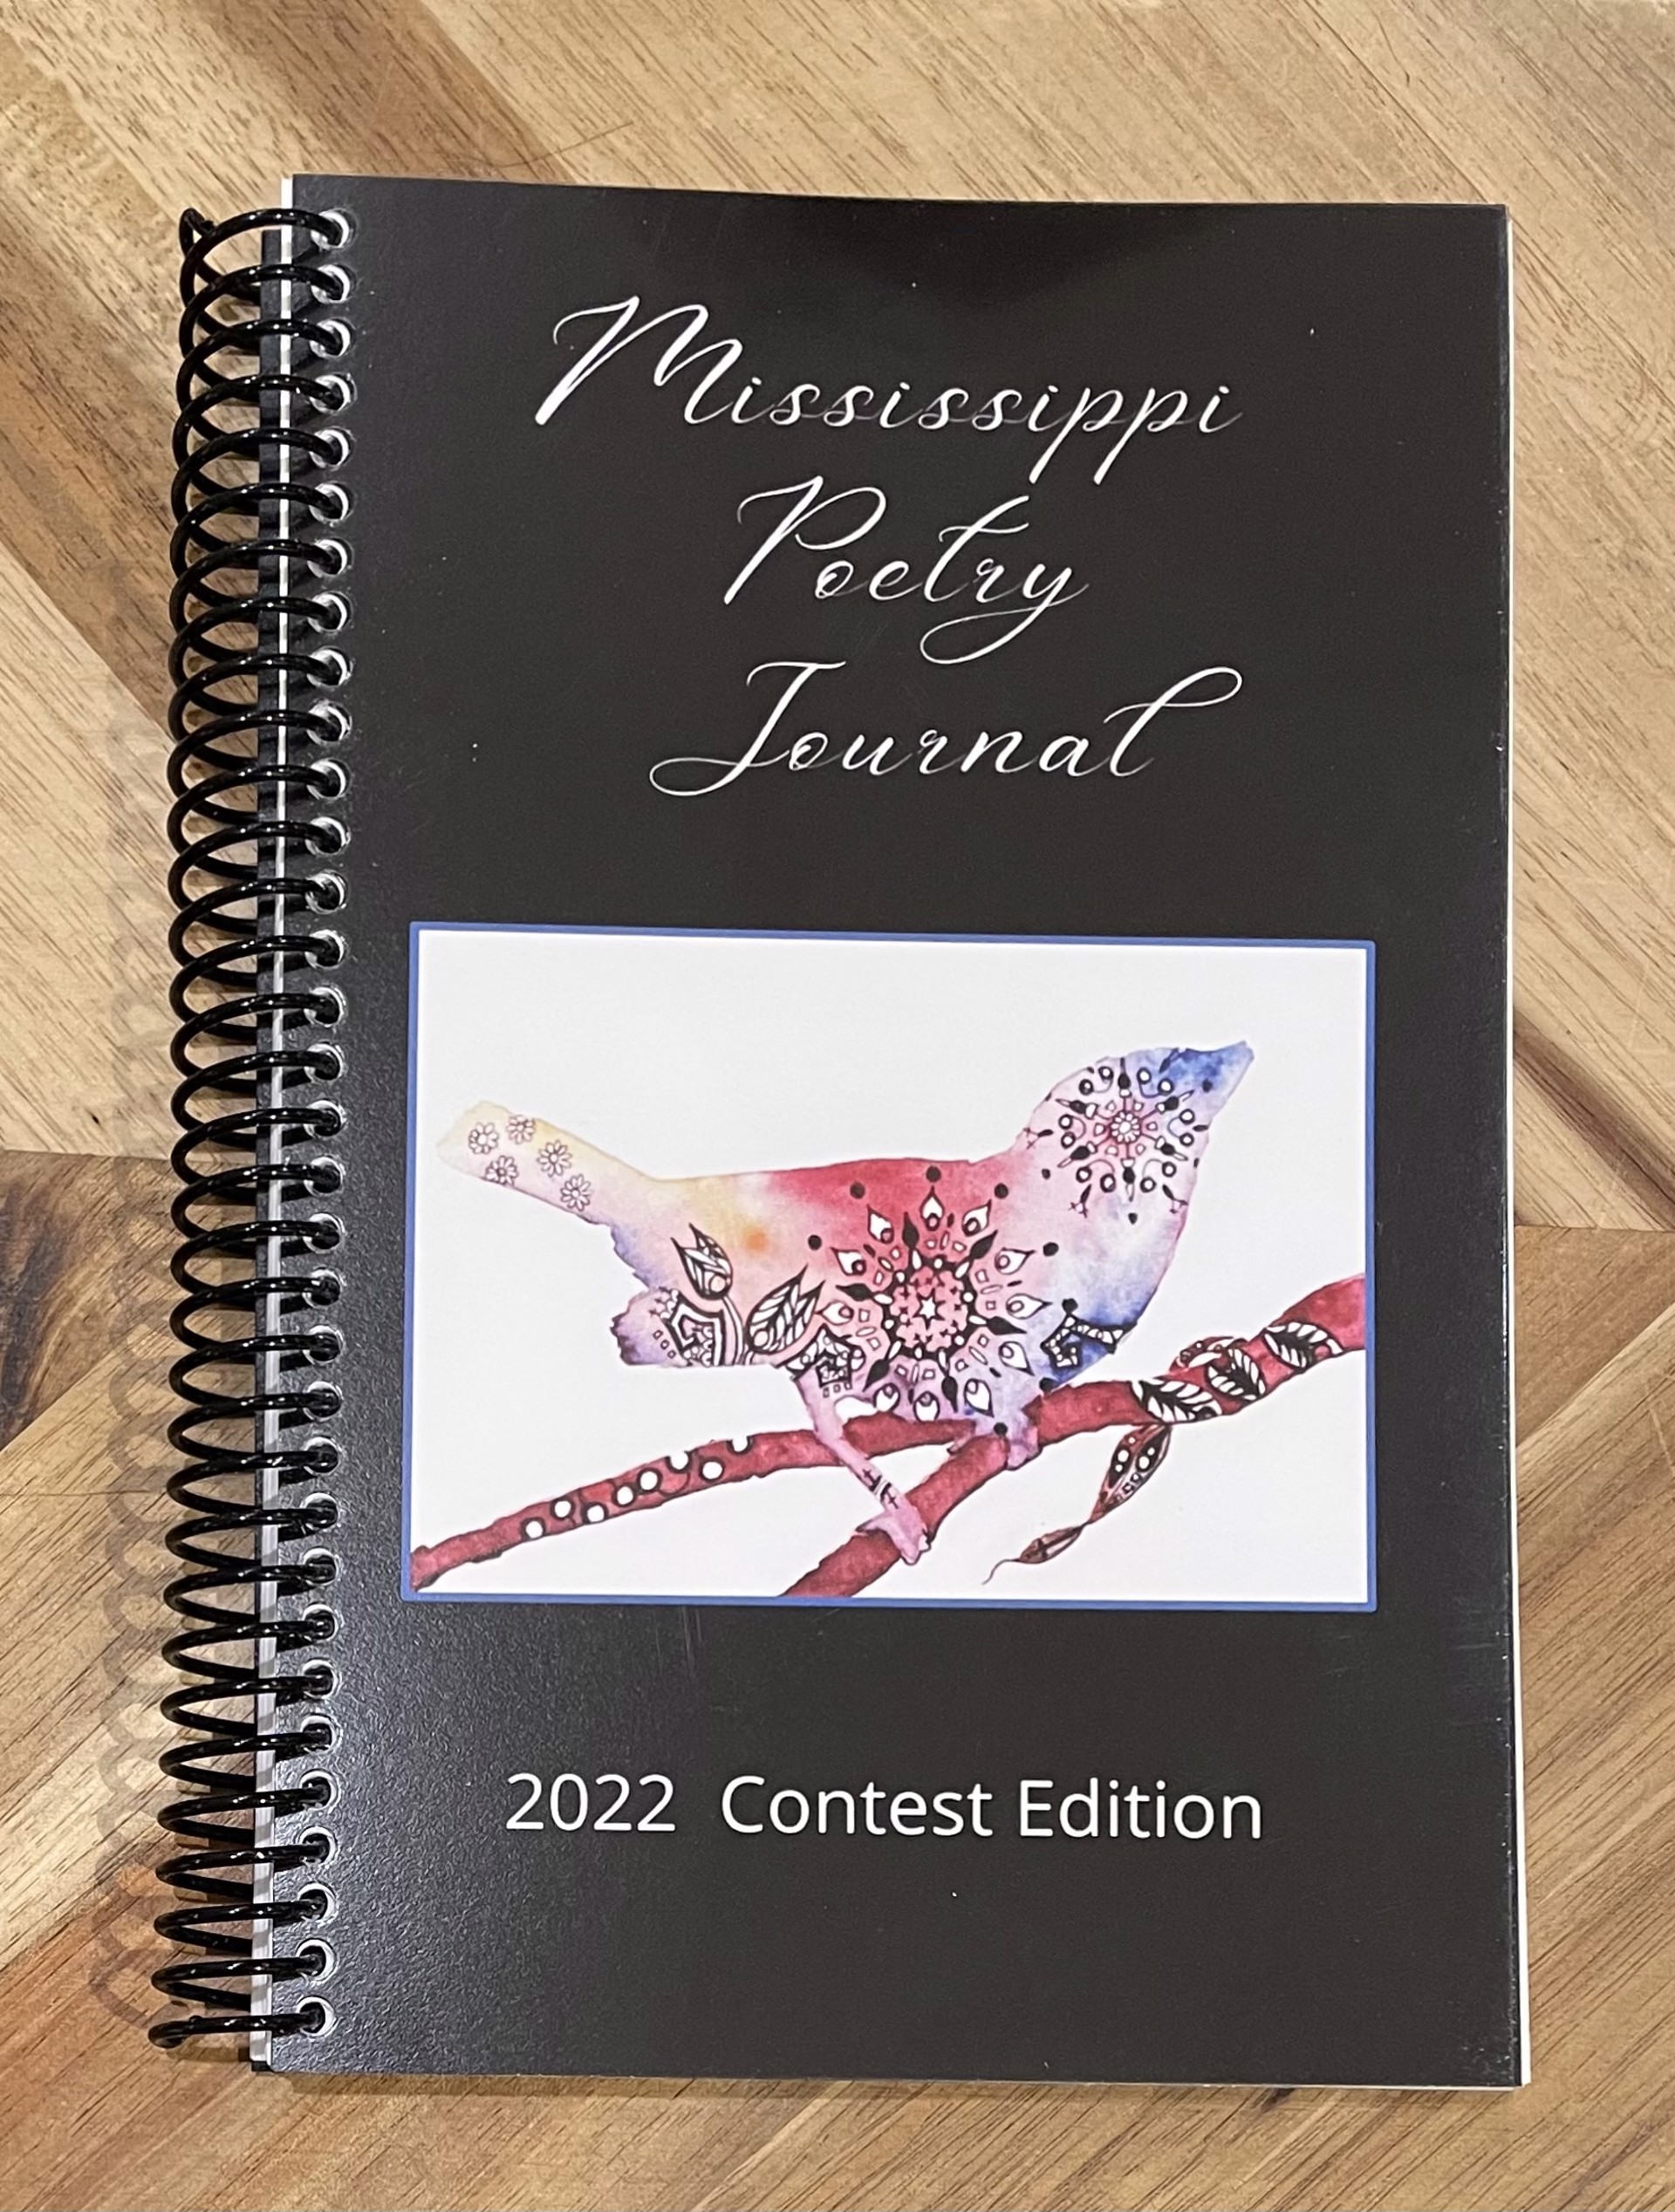 Mississippi Poetry Journal 2022 Contest Edition by Pacesetter Merchandise